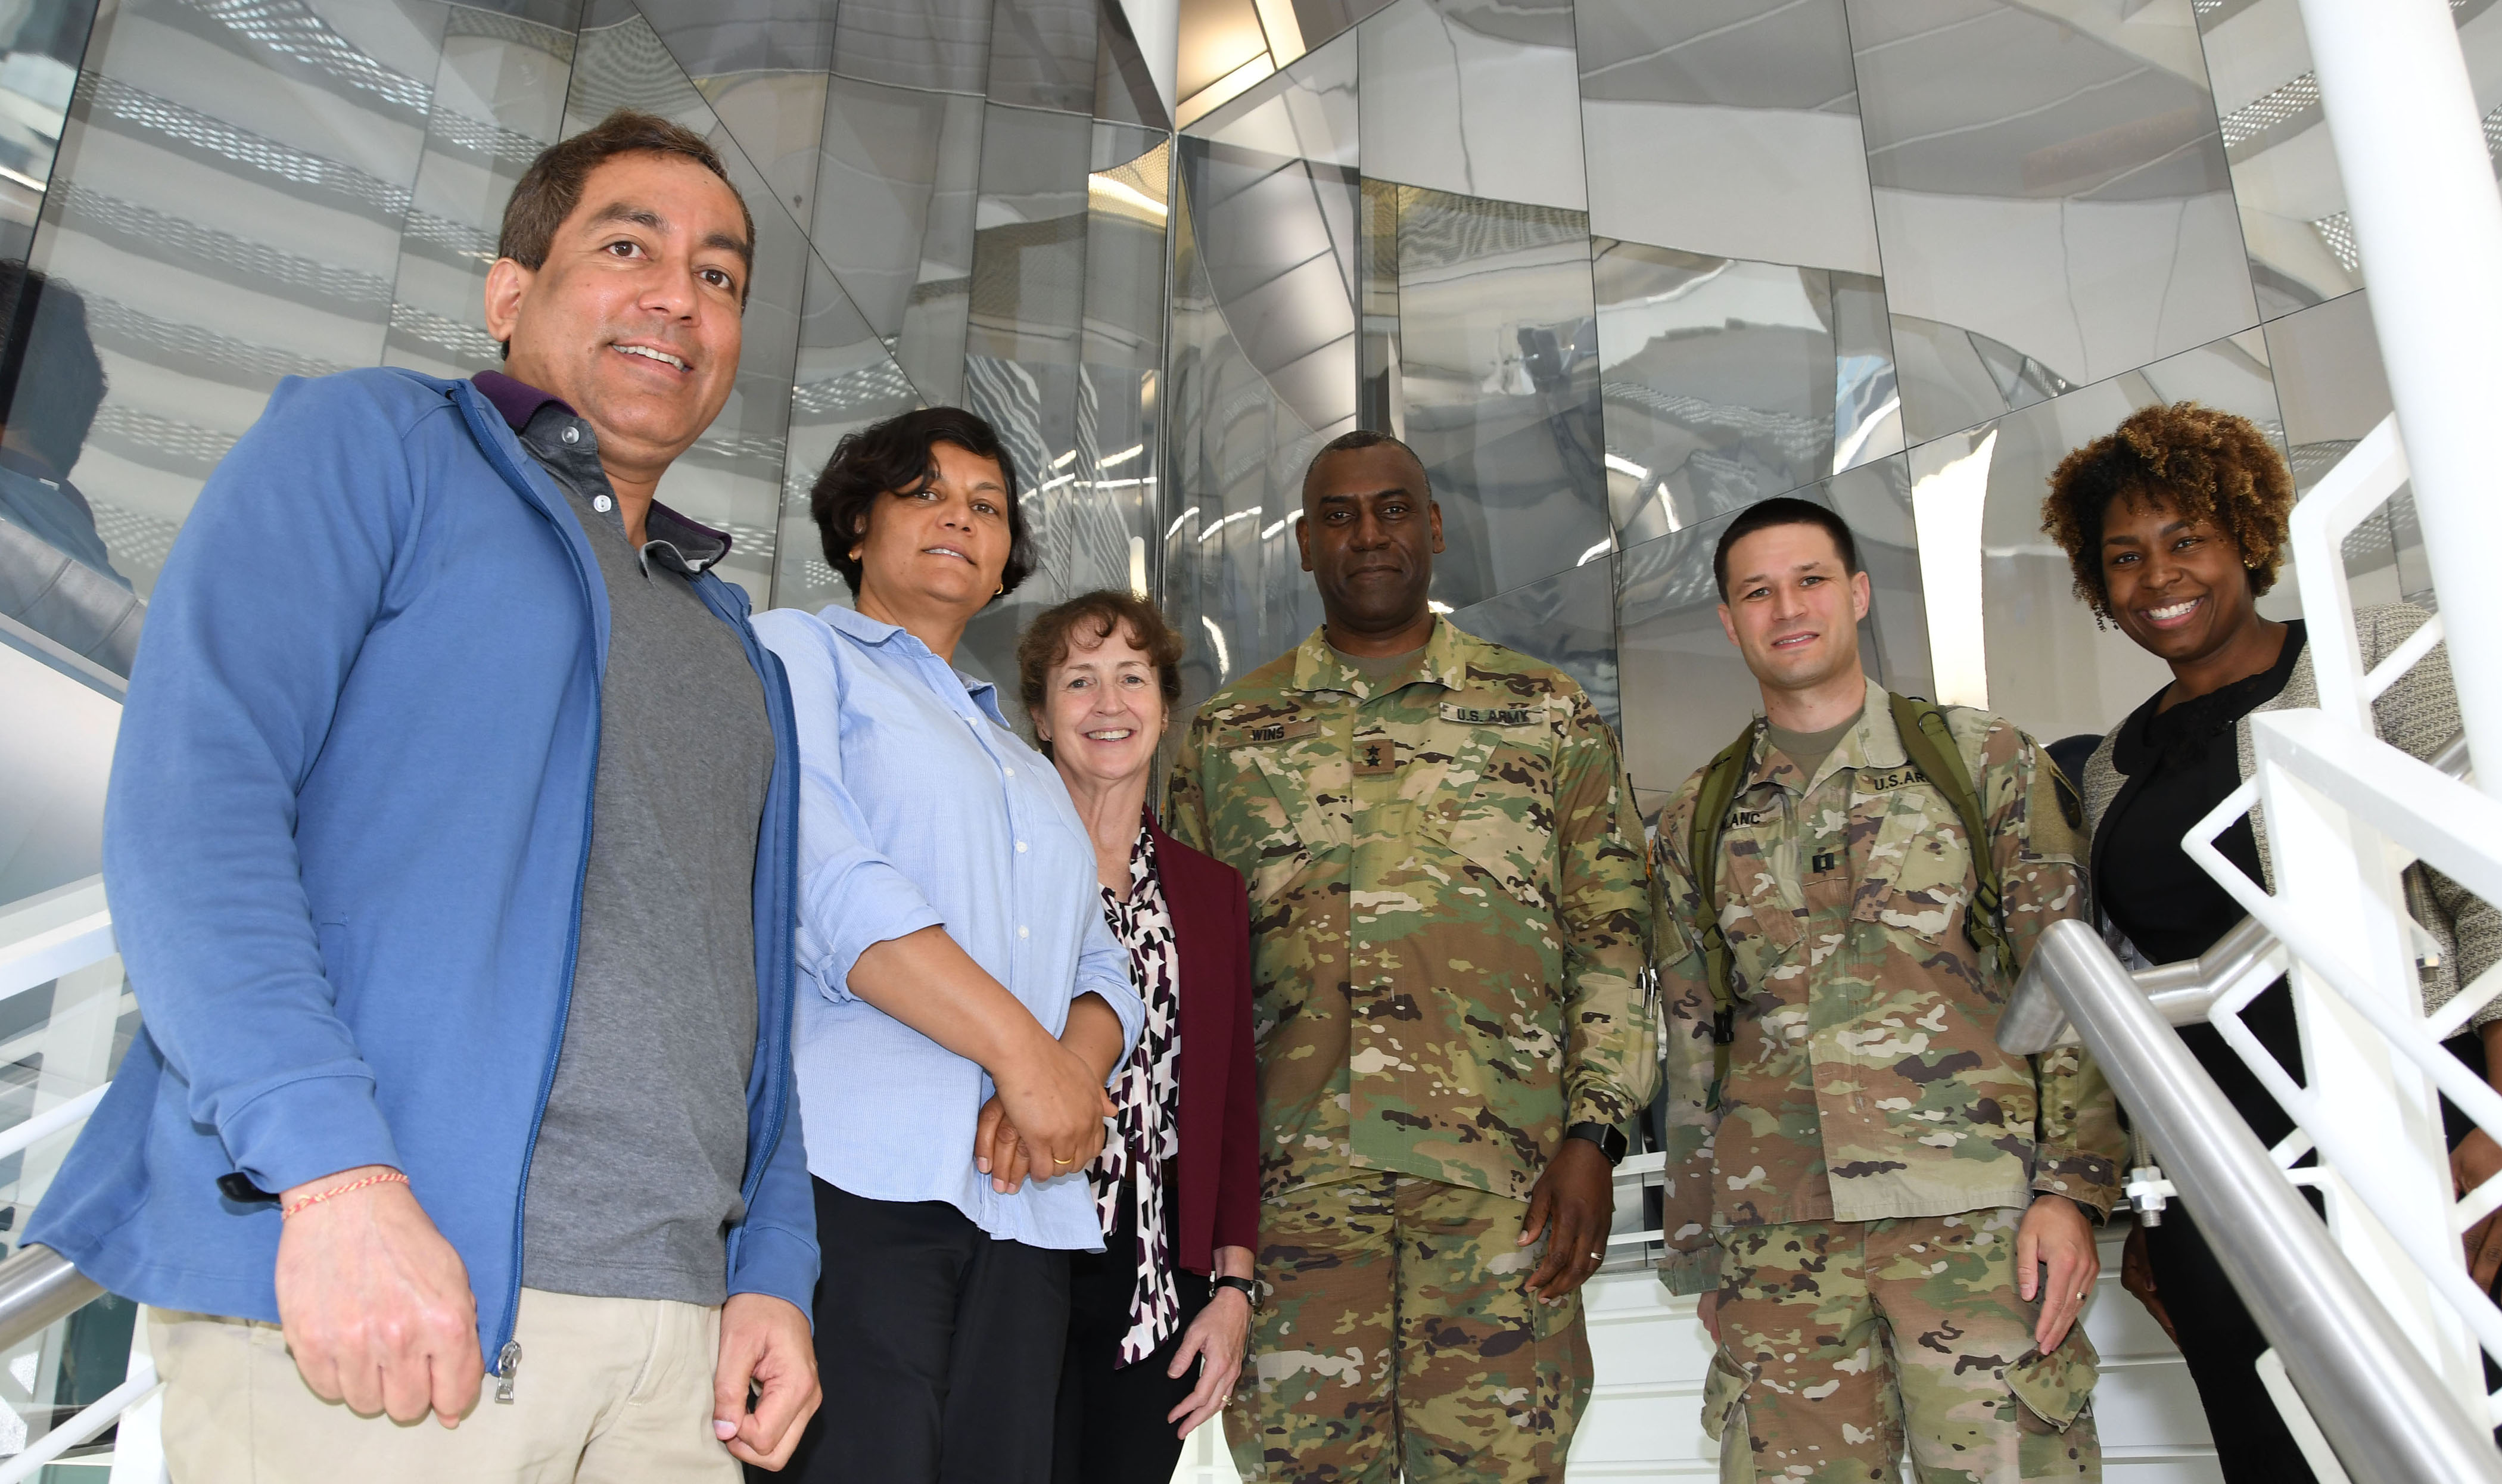 (L-r) DSU's Dr. Gour Pati, Dr. Renu Tripathi, Dr. Melissa Harrington with Maj. Gen. Cedric Wins, commanding general of the U.S. Army Research Development Engineering Command, along with his staff Capt. Joshua Blanc and Dr. Patrice Collins, who earned her Ph.D. at DSU.